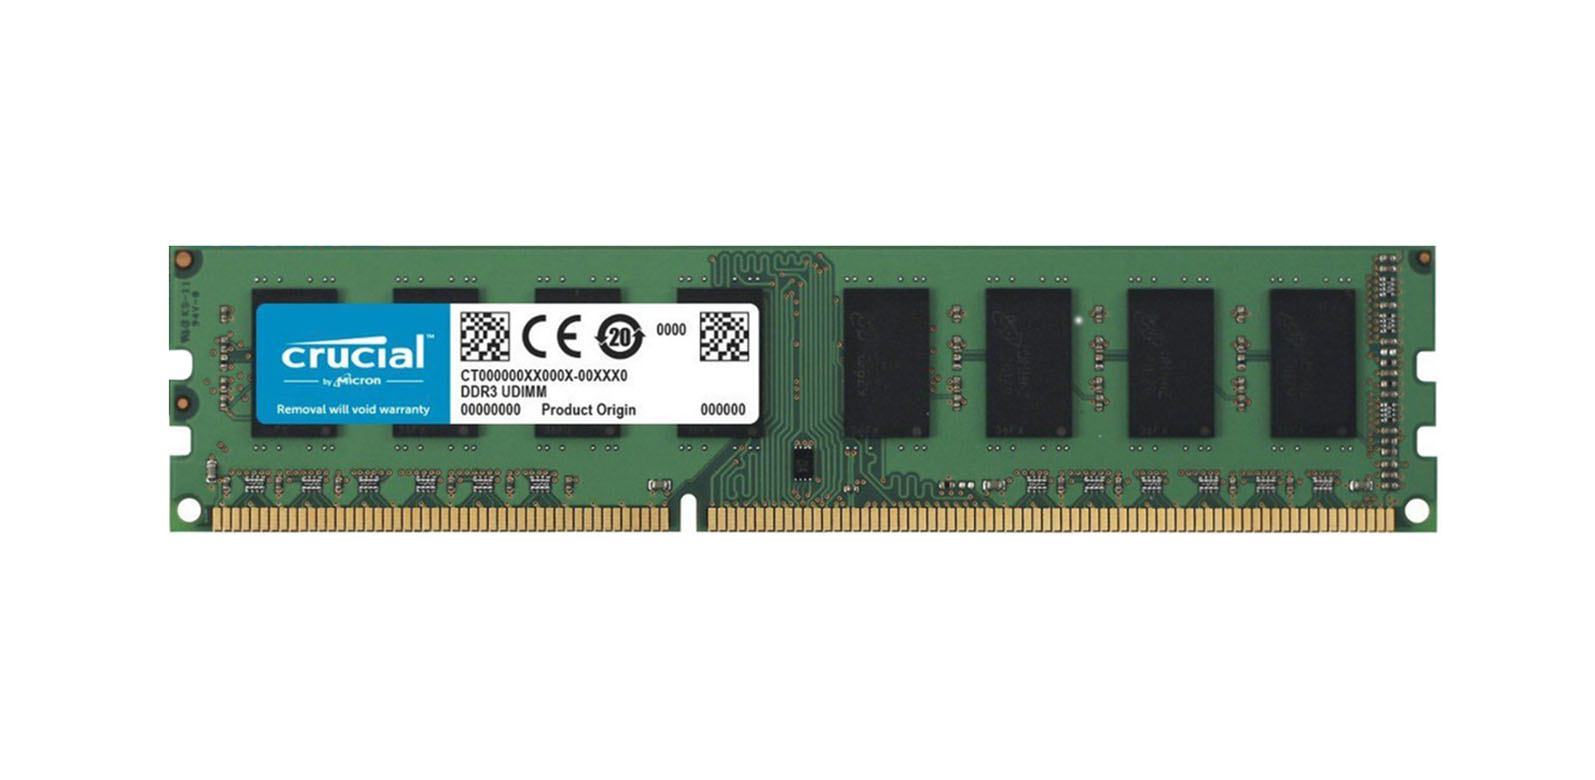 Crucial CT3609239 8GB DDR3-1600MHz PC3-12800 ECC Registered CL11 240-Pin DIMM 1.35V Low Voltage Dual Rank Very Low Profile (VLP) Memory Module upgrade for Tyan S7040GM2NR